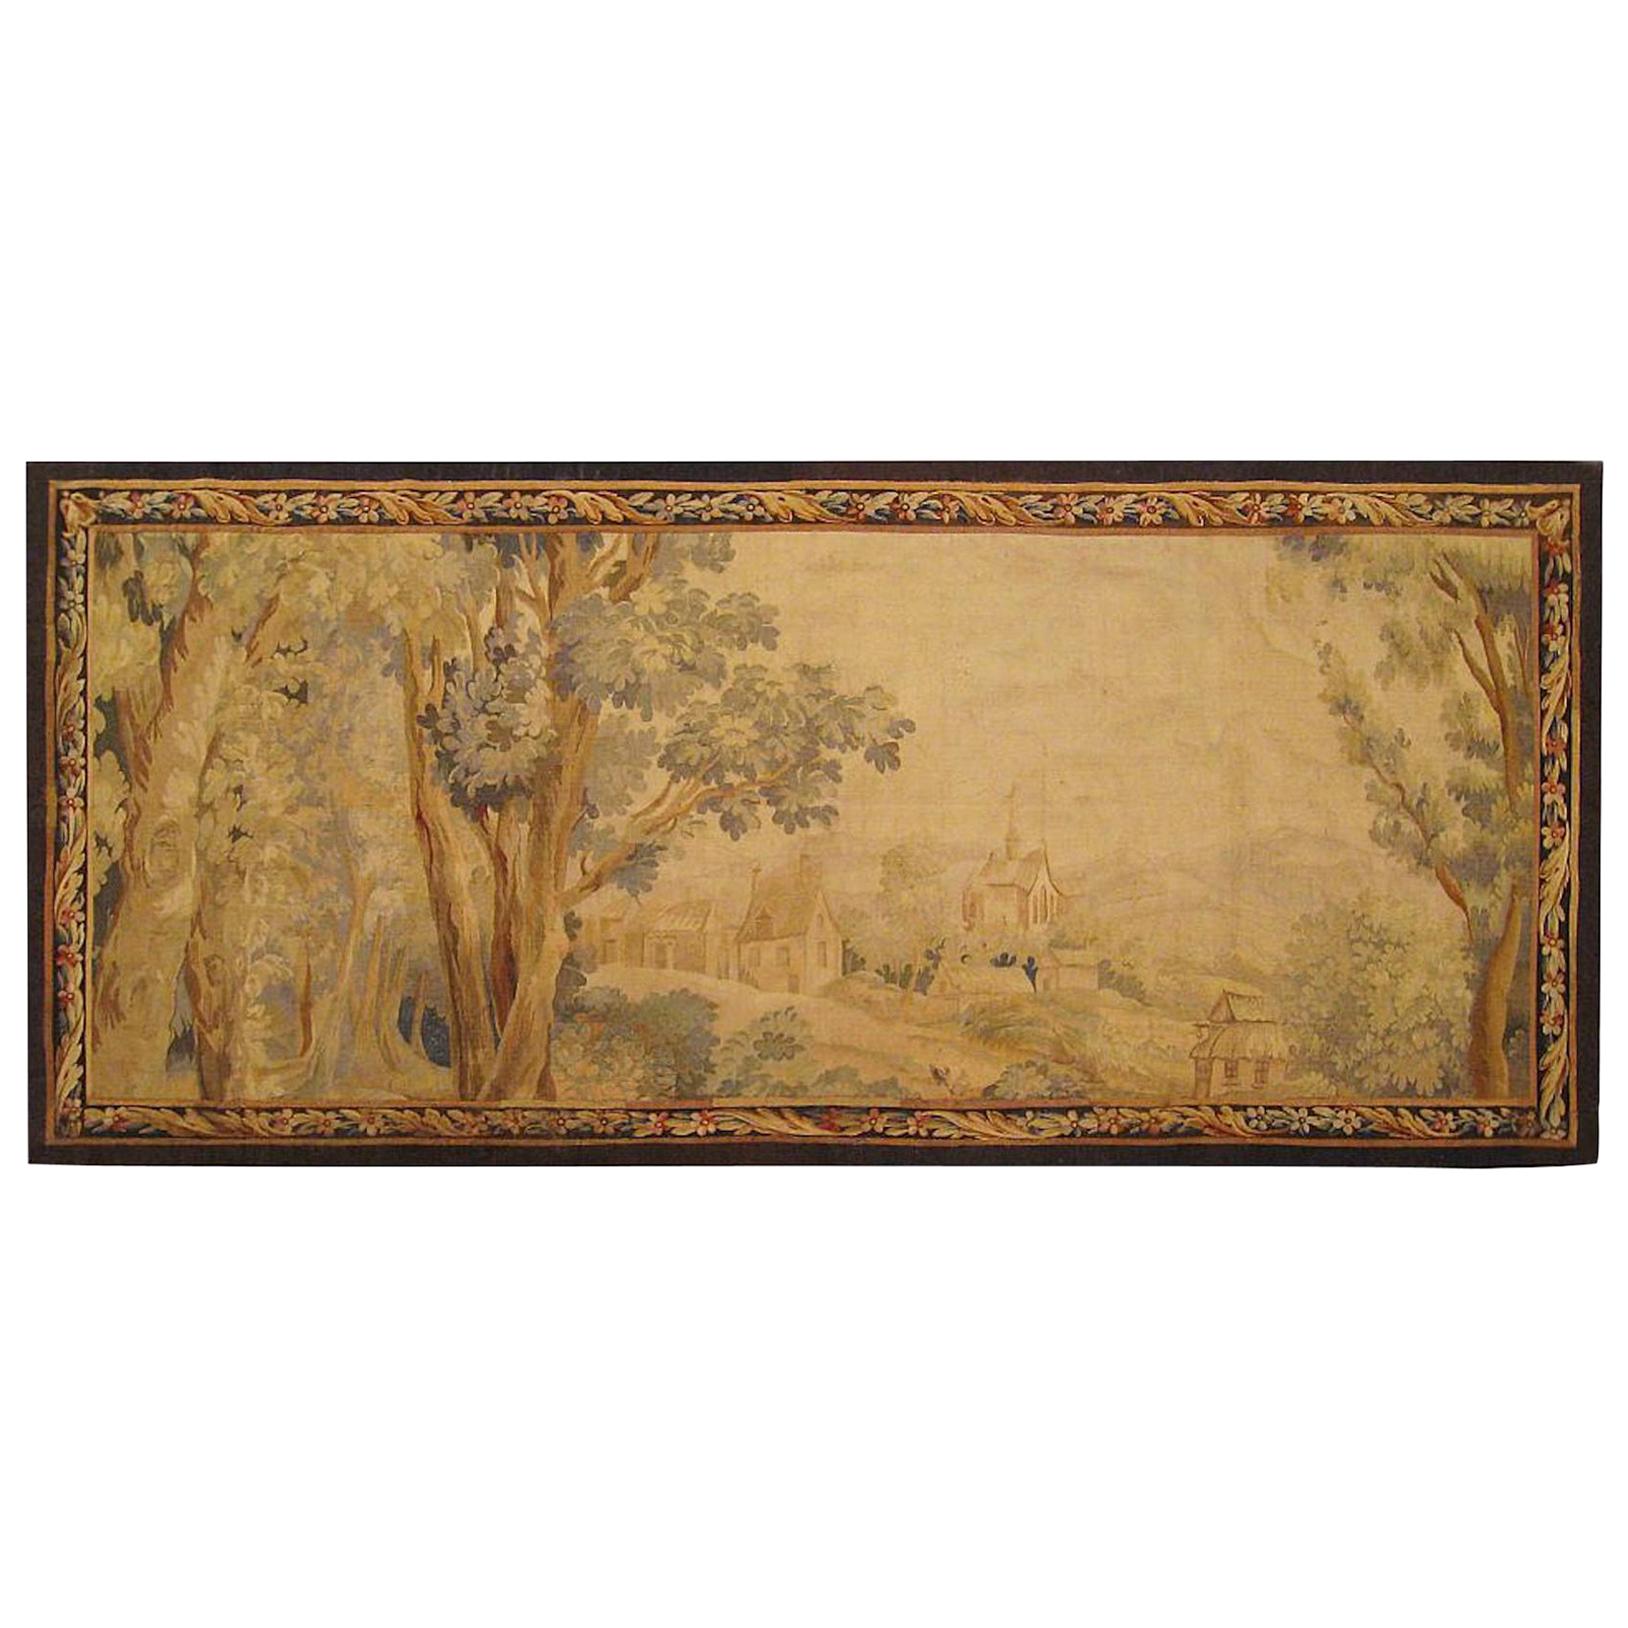 Late 18th Century French Landscape Tapestry